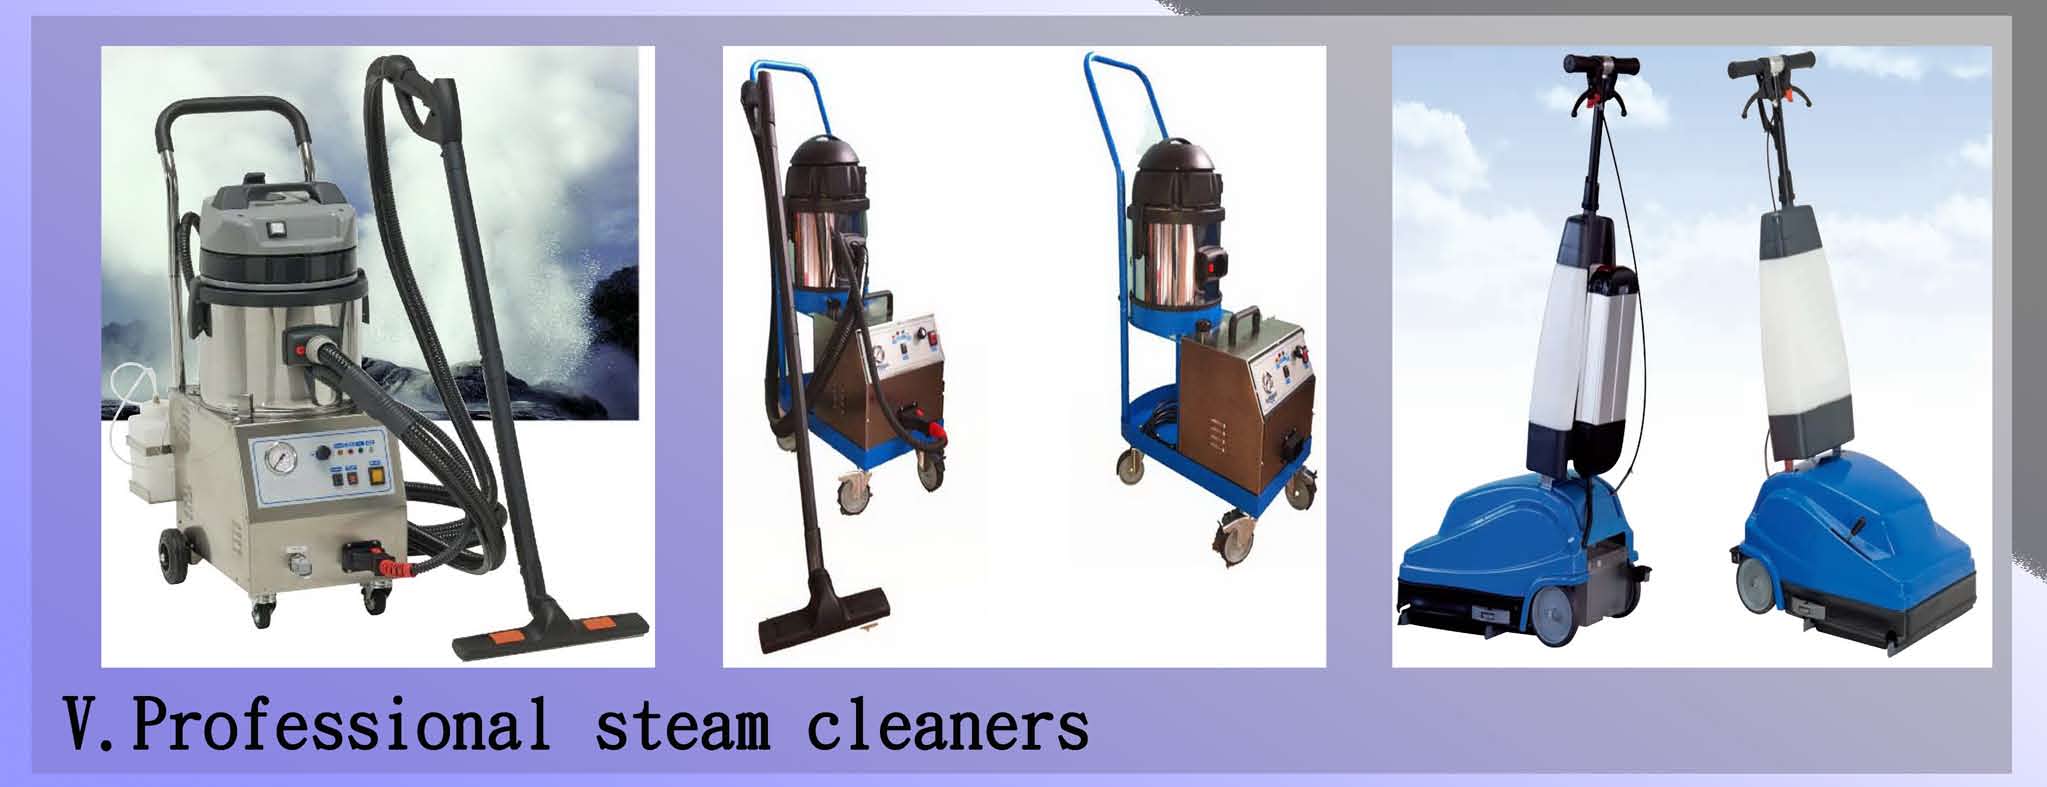 Professional steam cleaners